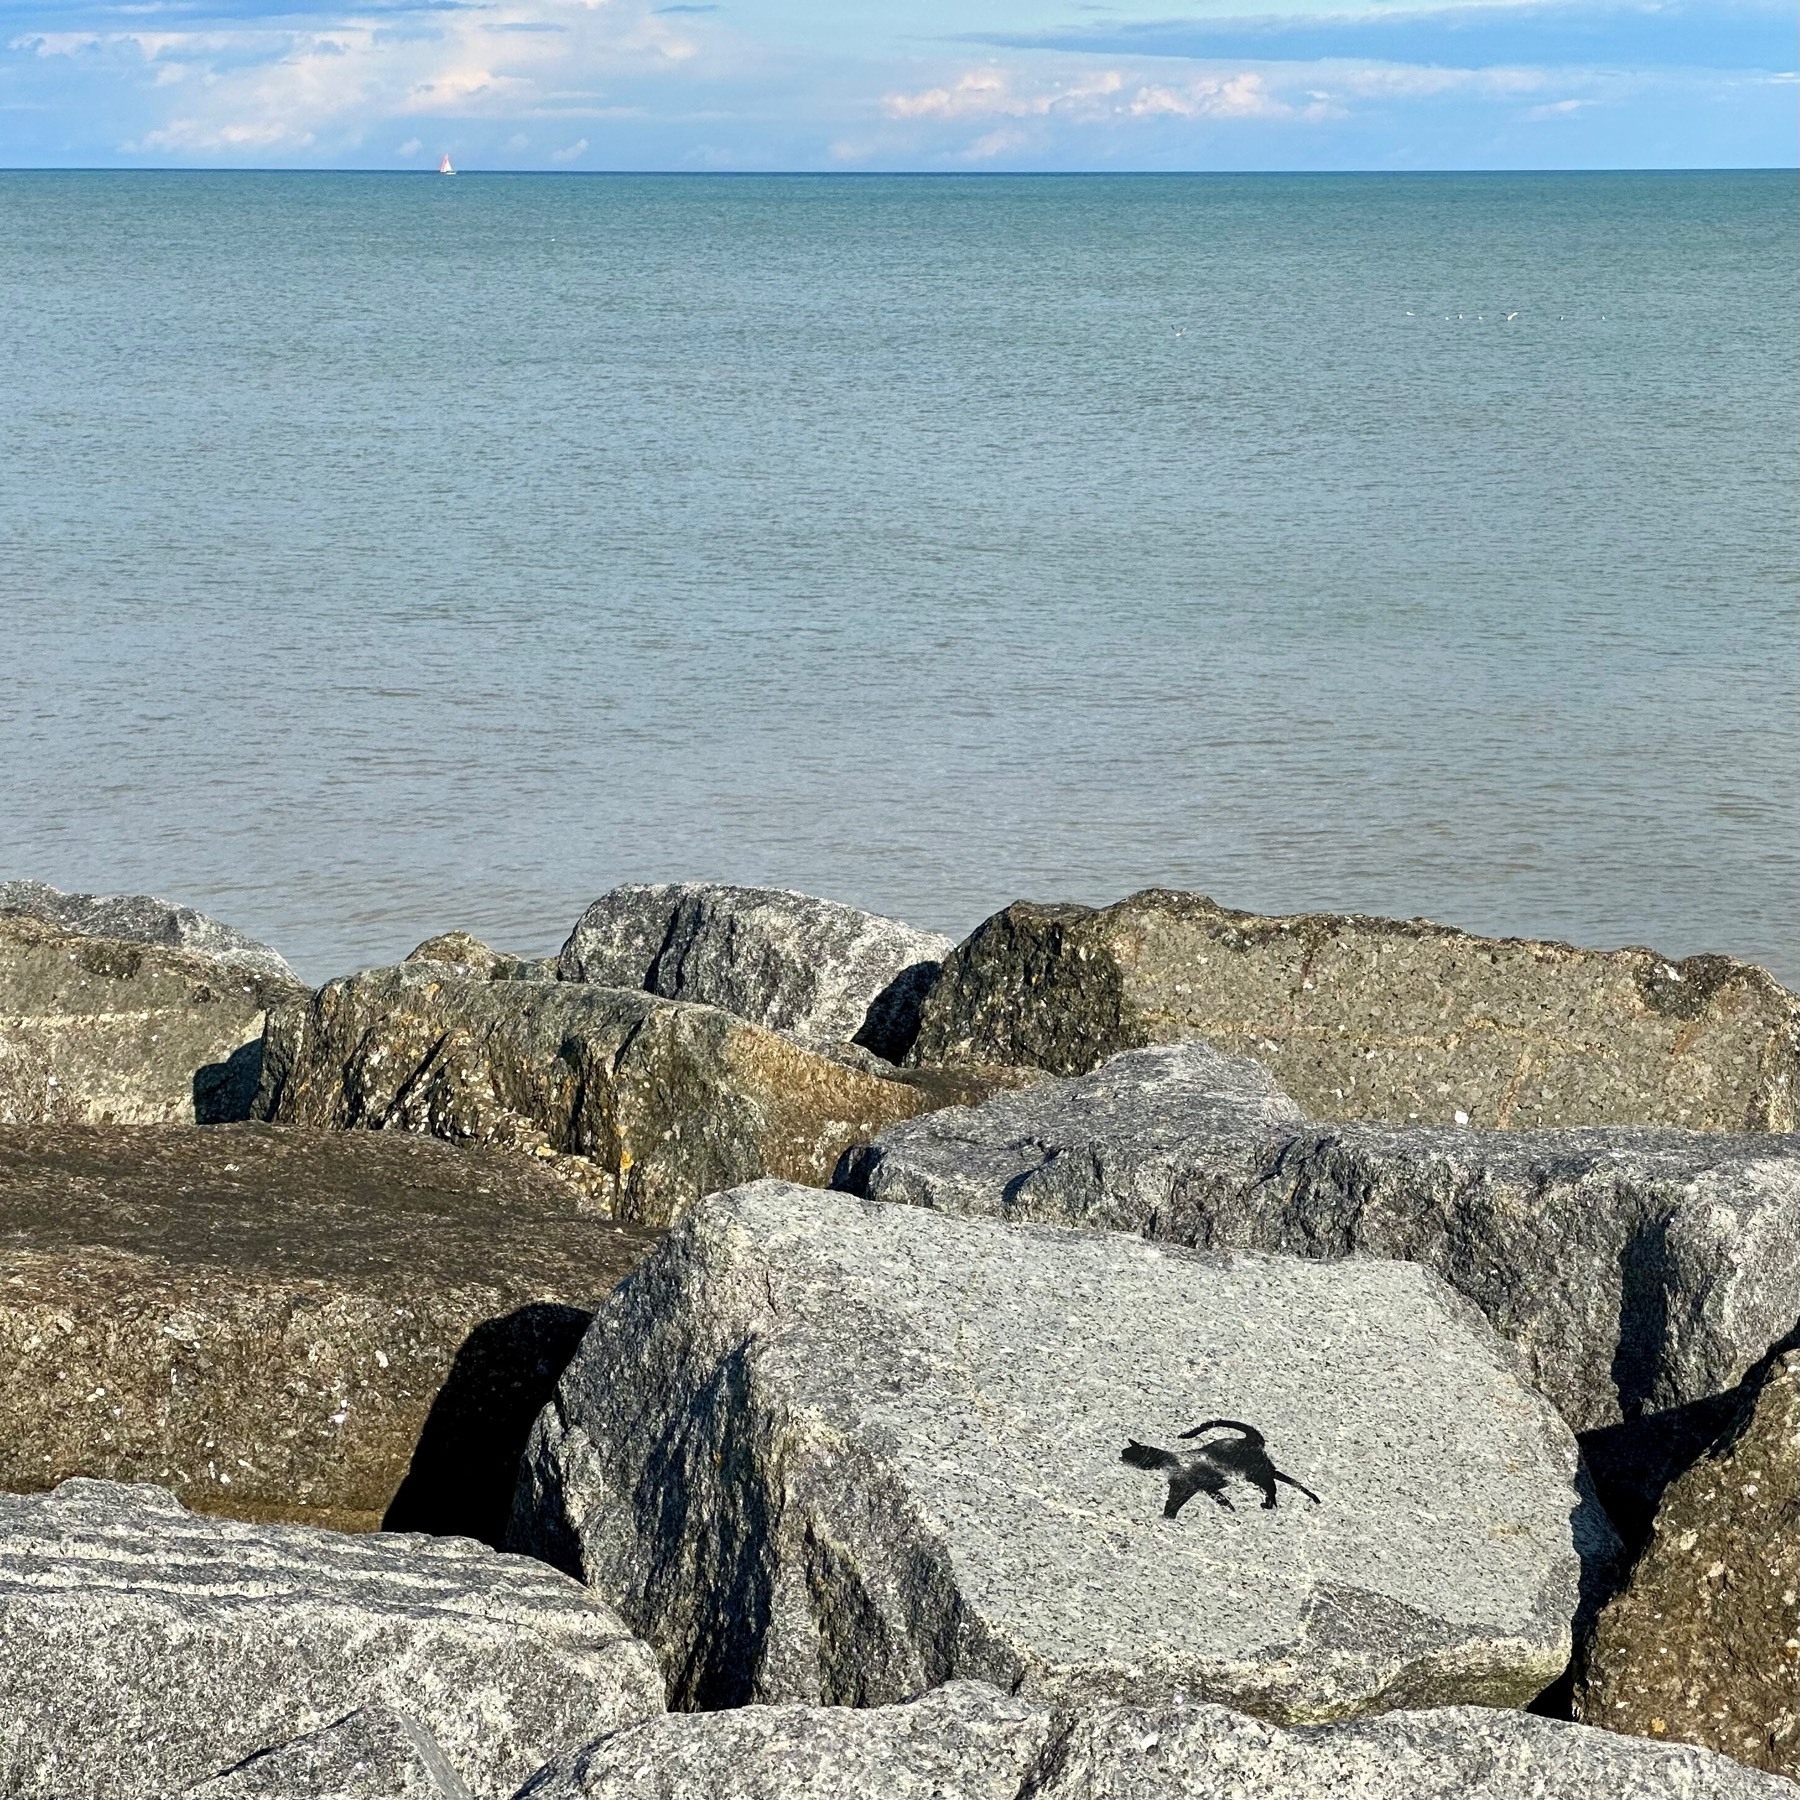 Black cat etched on giant rocks by the seaside, with a sailboat off in the distance